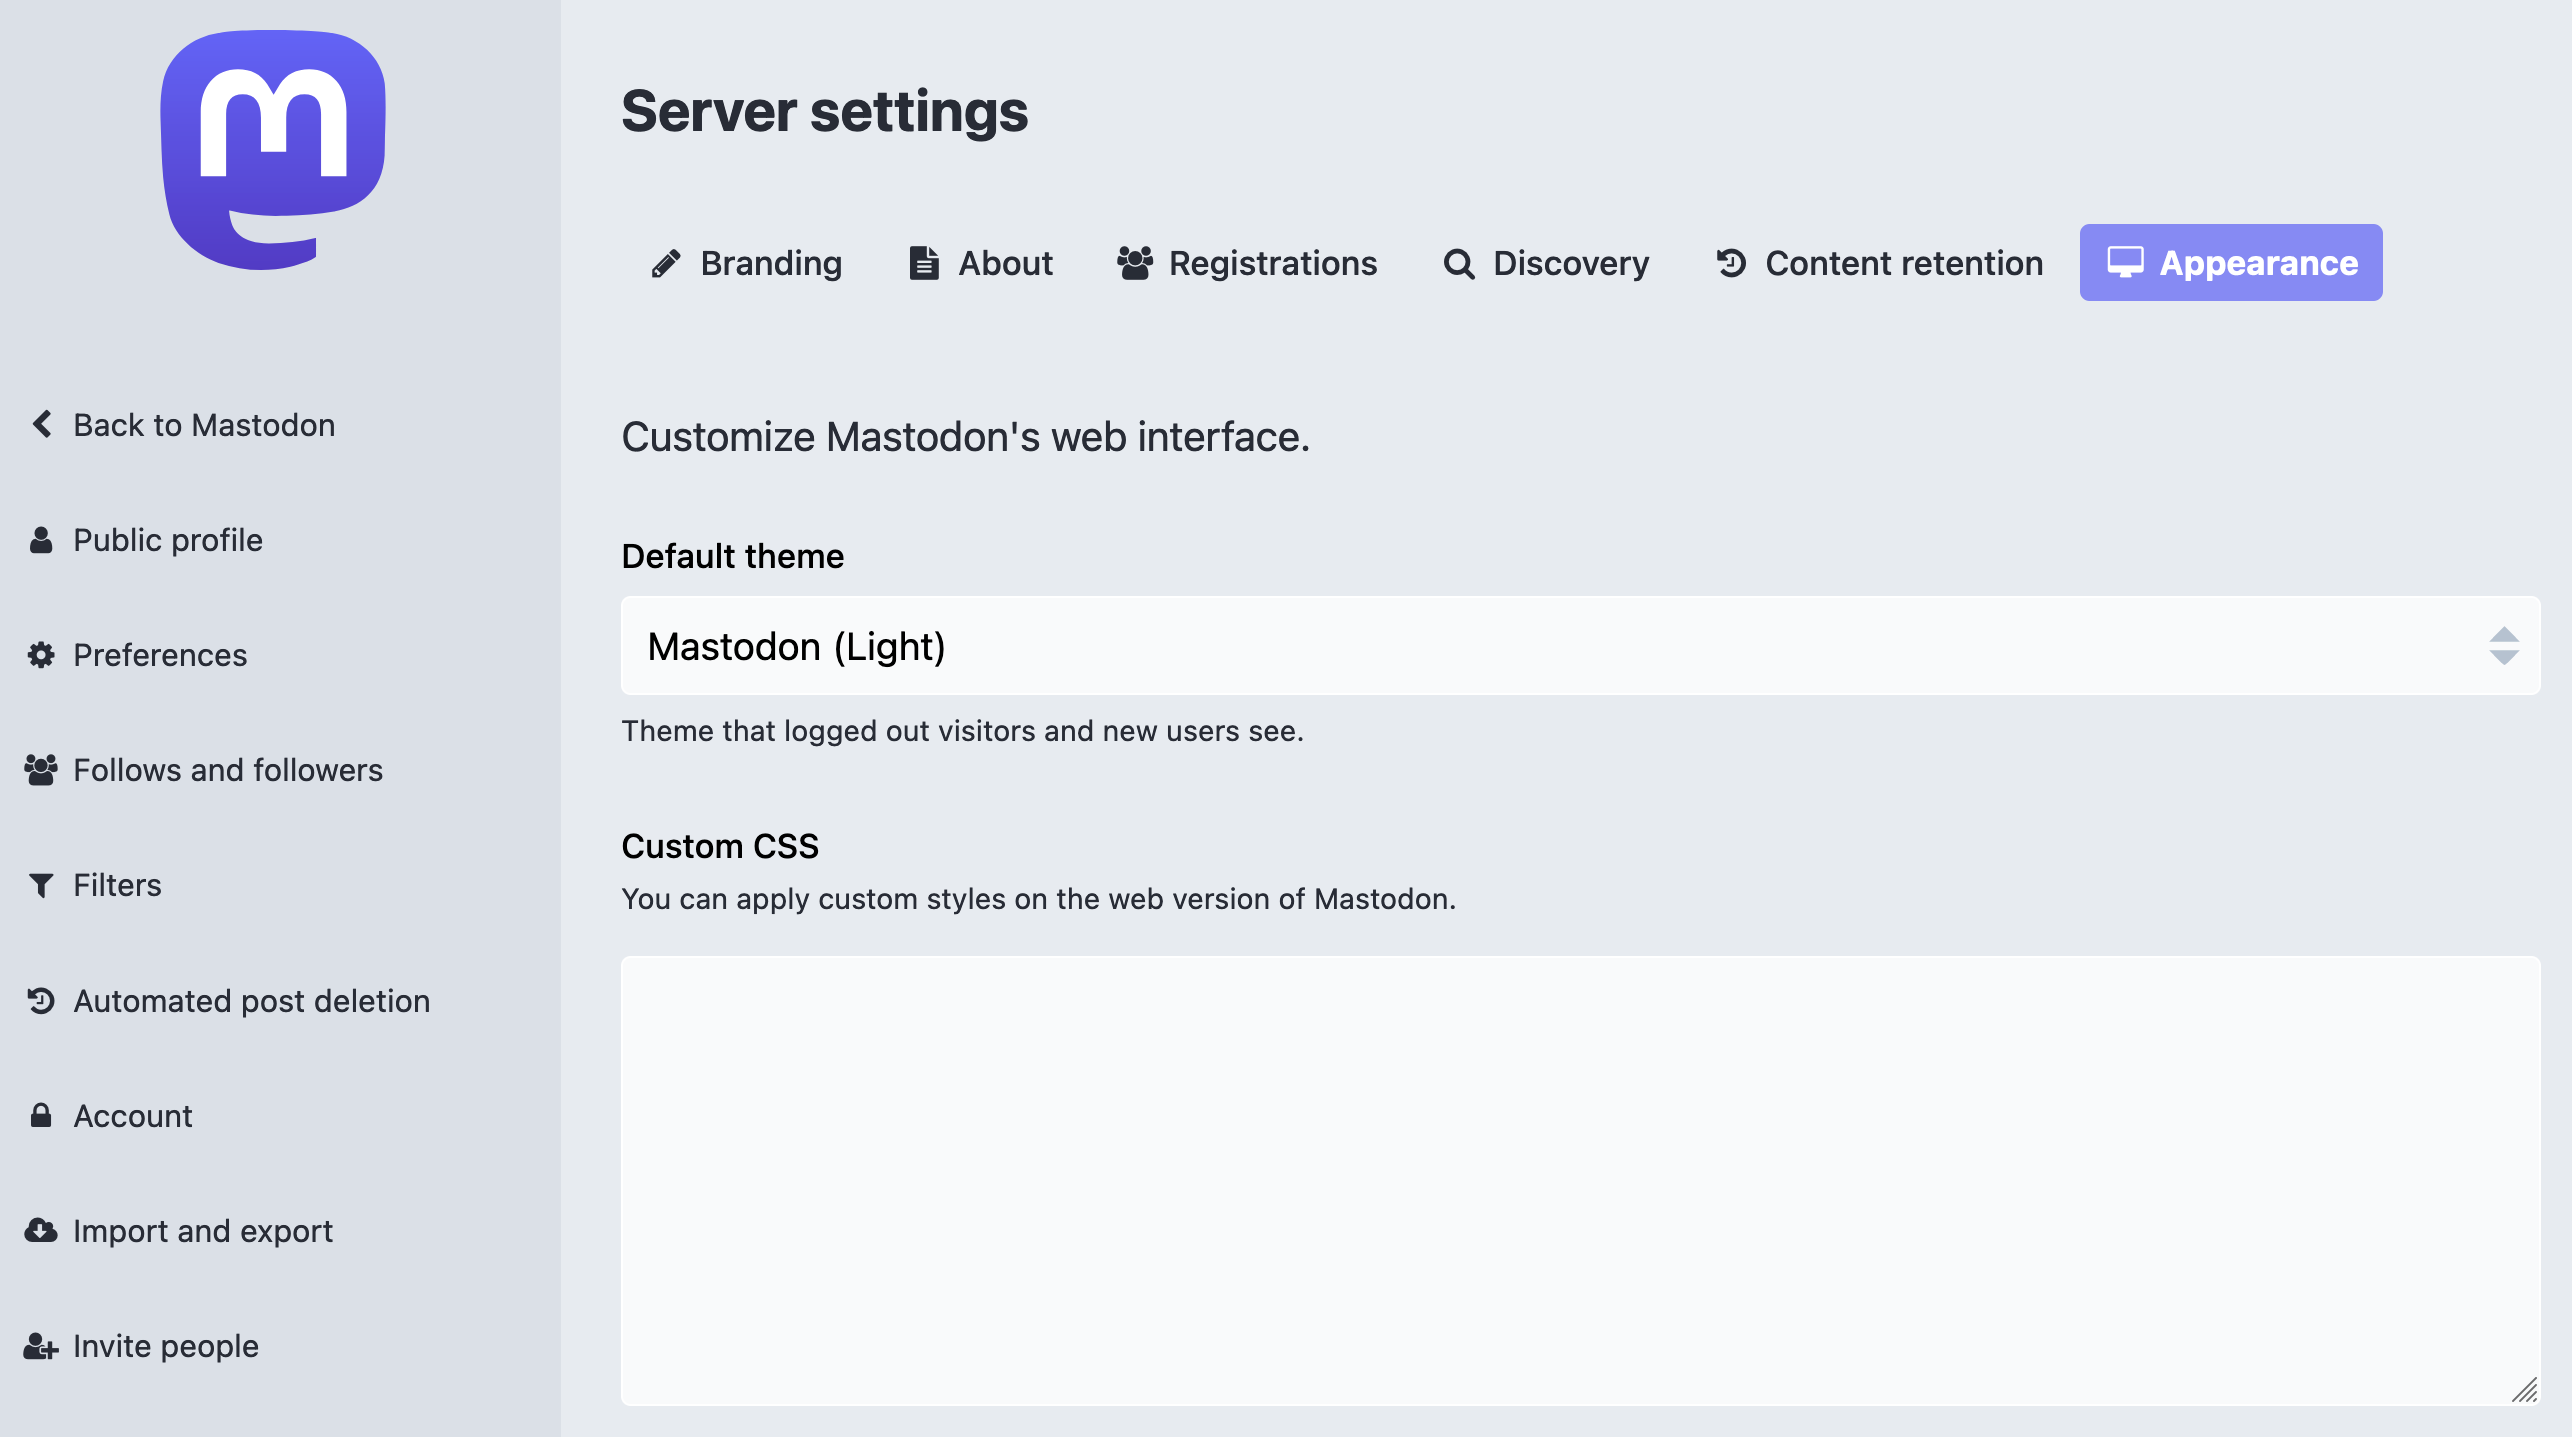 A webpage titled, 'Server settings'. There are six subnav options, which read, 'Branding', 'About', 'Registrations,' 'Discovery,' 'Content creation', and 'Appearance'. The Appearance option is active. Following is a subheading that reads, 'Customize Mastodon's web interface'. Within this subheading section are two labels. The first label is for a select menu and reads, 'Default theme'. Its corresponding select is set to, 'Mastodon (Light)'. The second label reads, 'Custom CSS'. Its corresponding input is a large text area where CSS code can be added. There are also primary navigation options present for other parts of the Mastodon admin interface, and a link to return to Mastodon's main timeline page. Cropped screenshot.